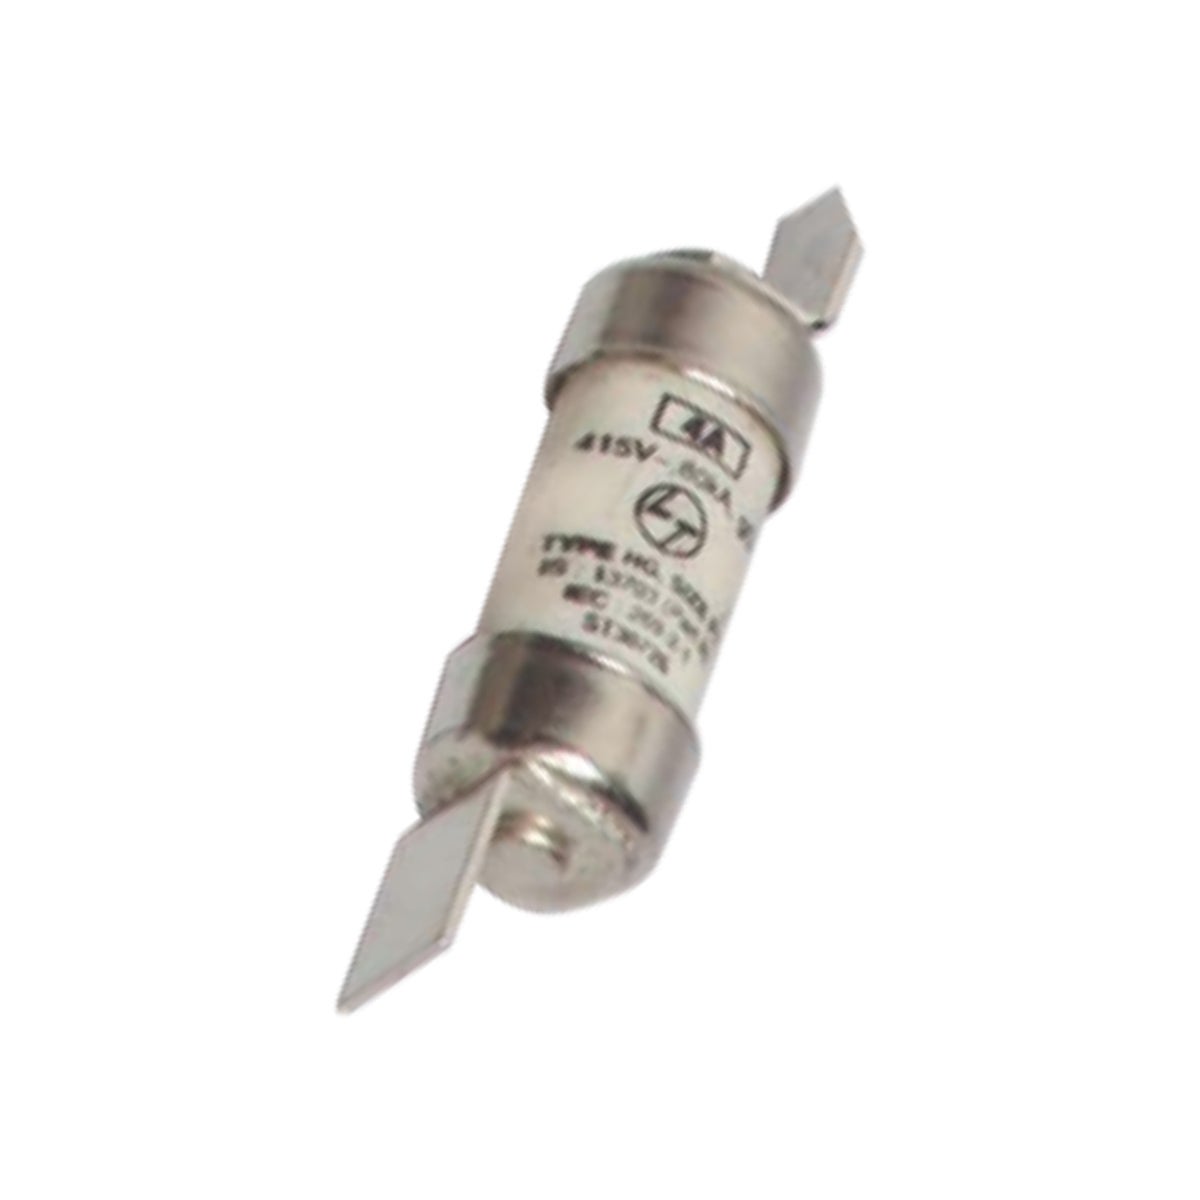 HG Bolted HRC fuse 25A 415V AC Size F1